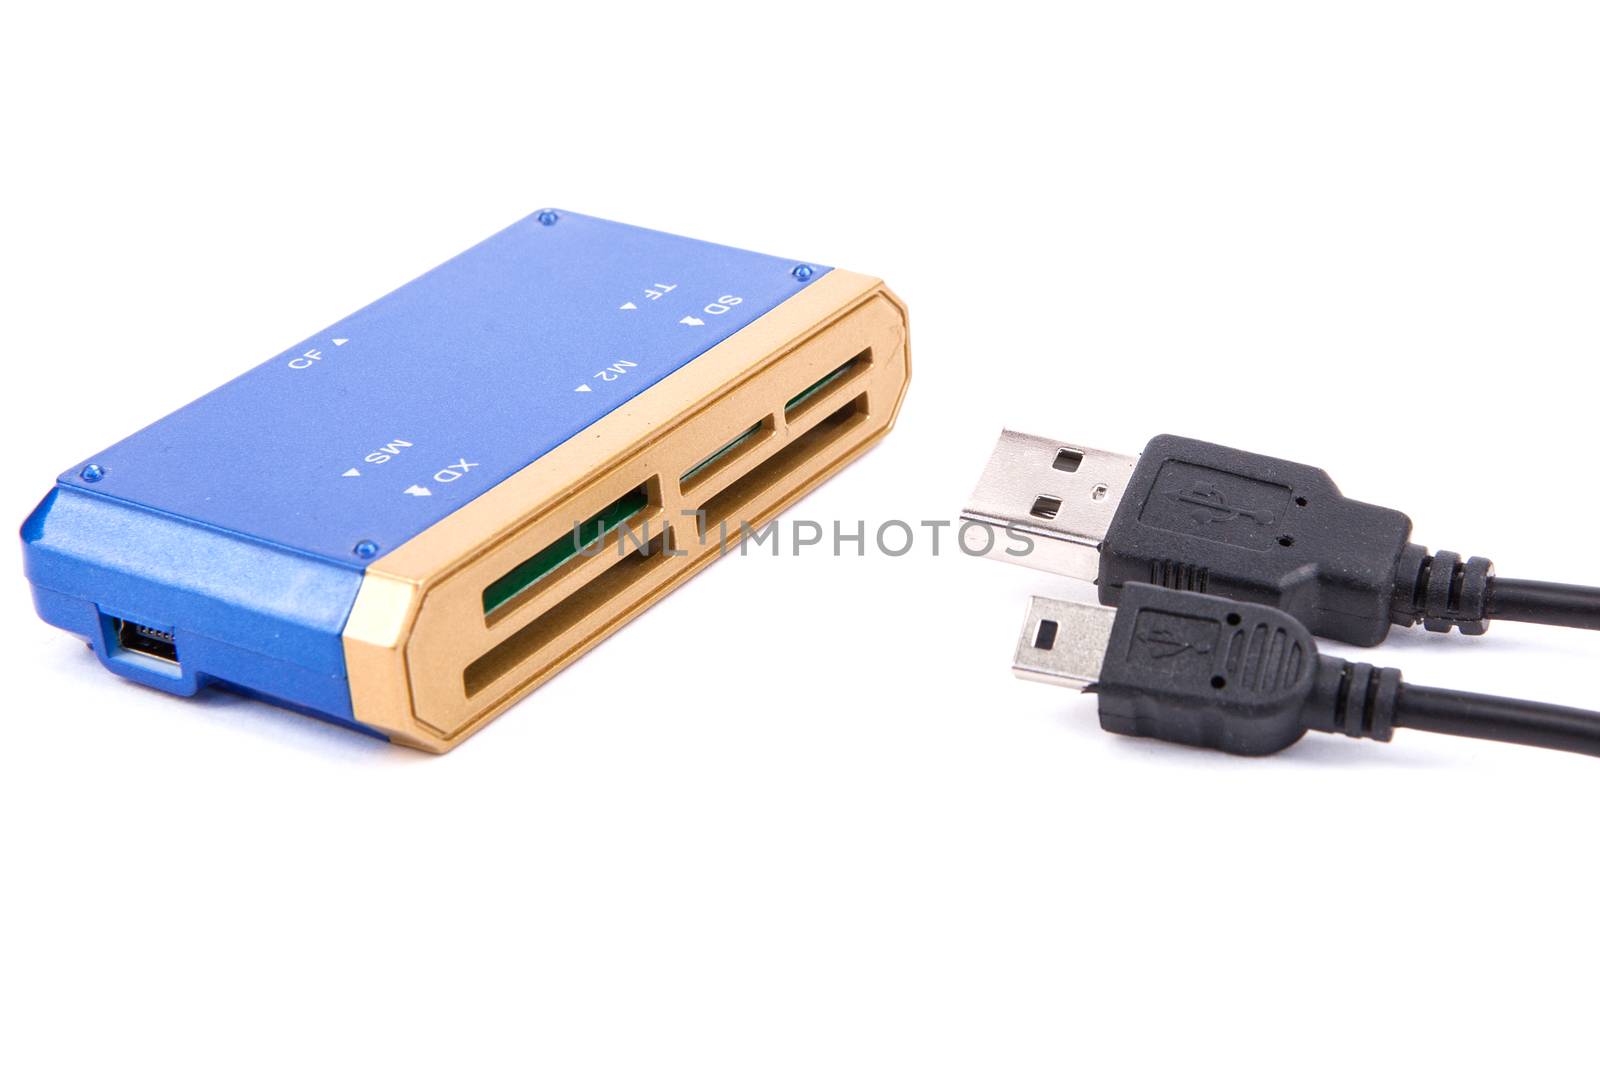 external usb cardreader and usb cabel isolated on white background